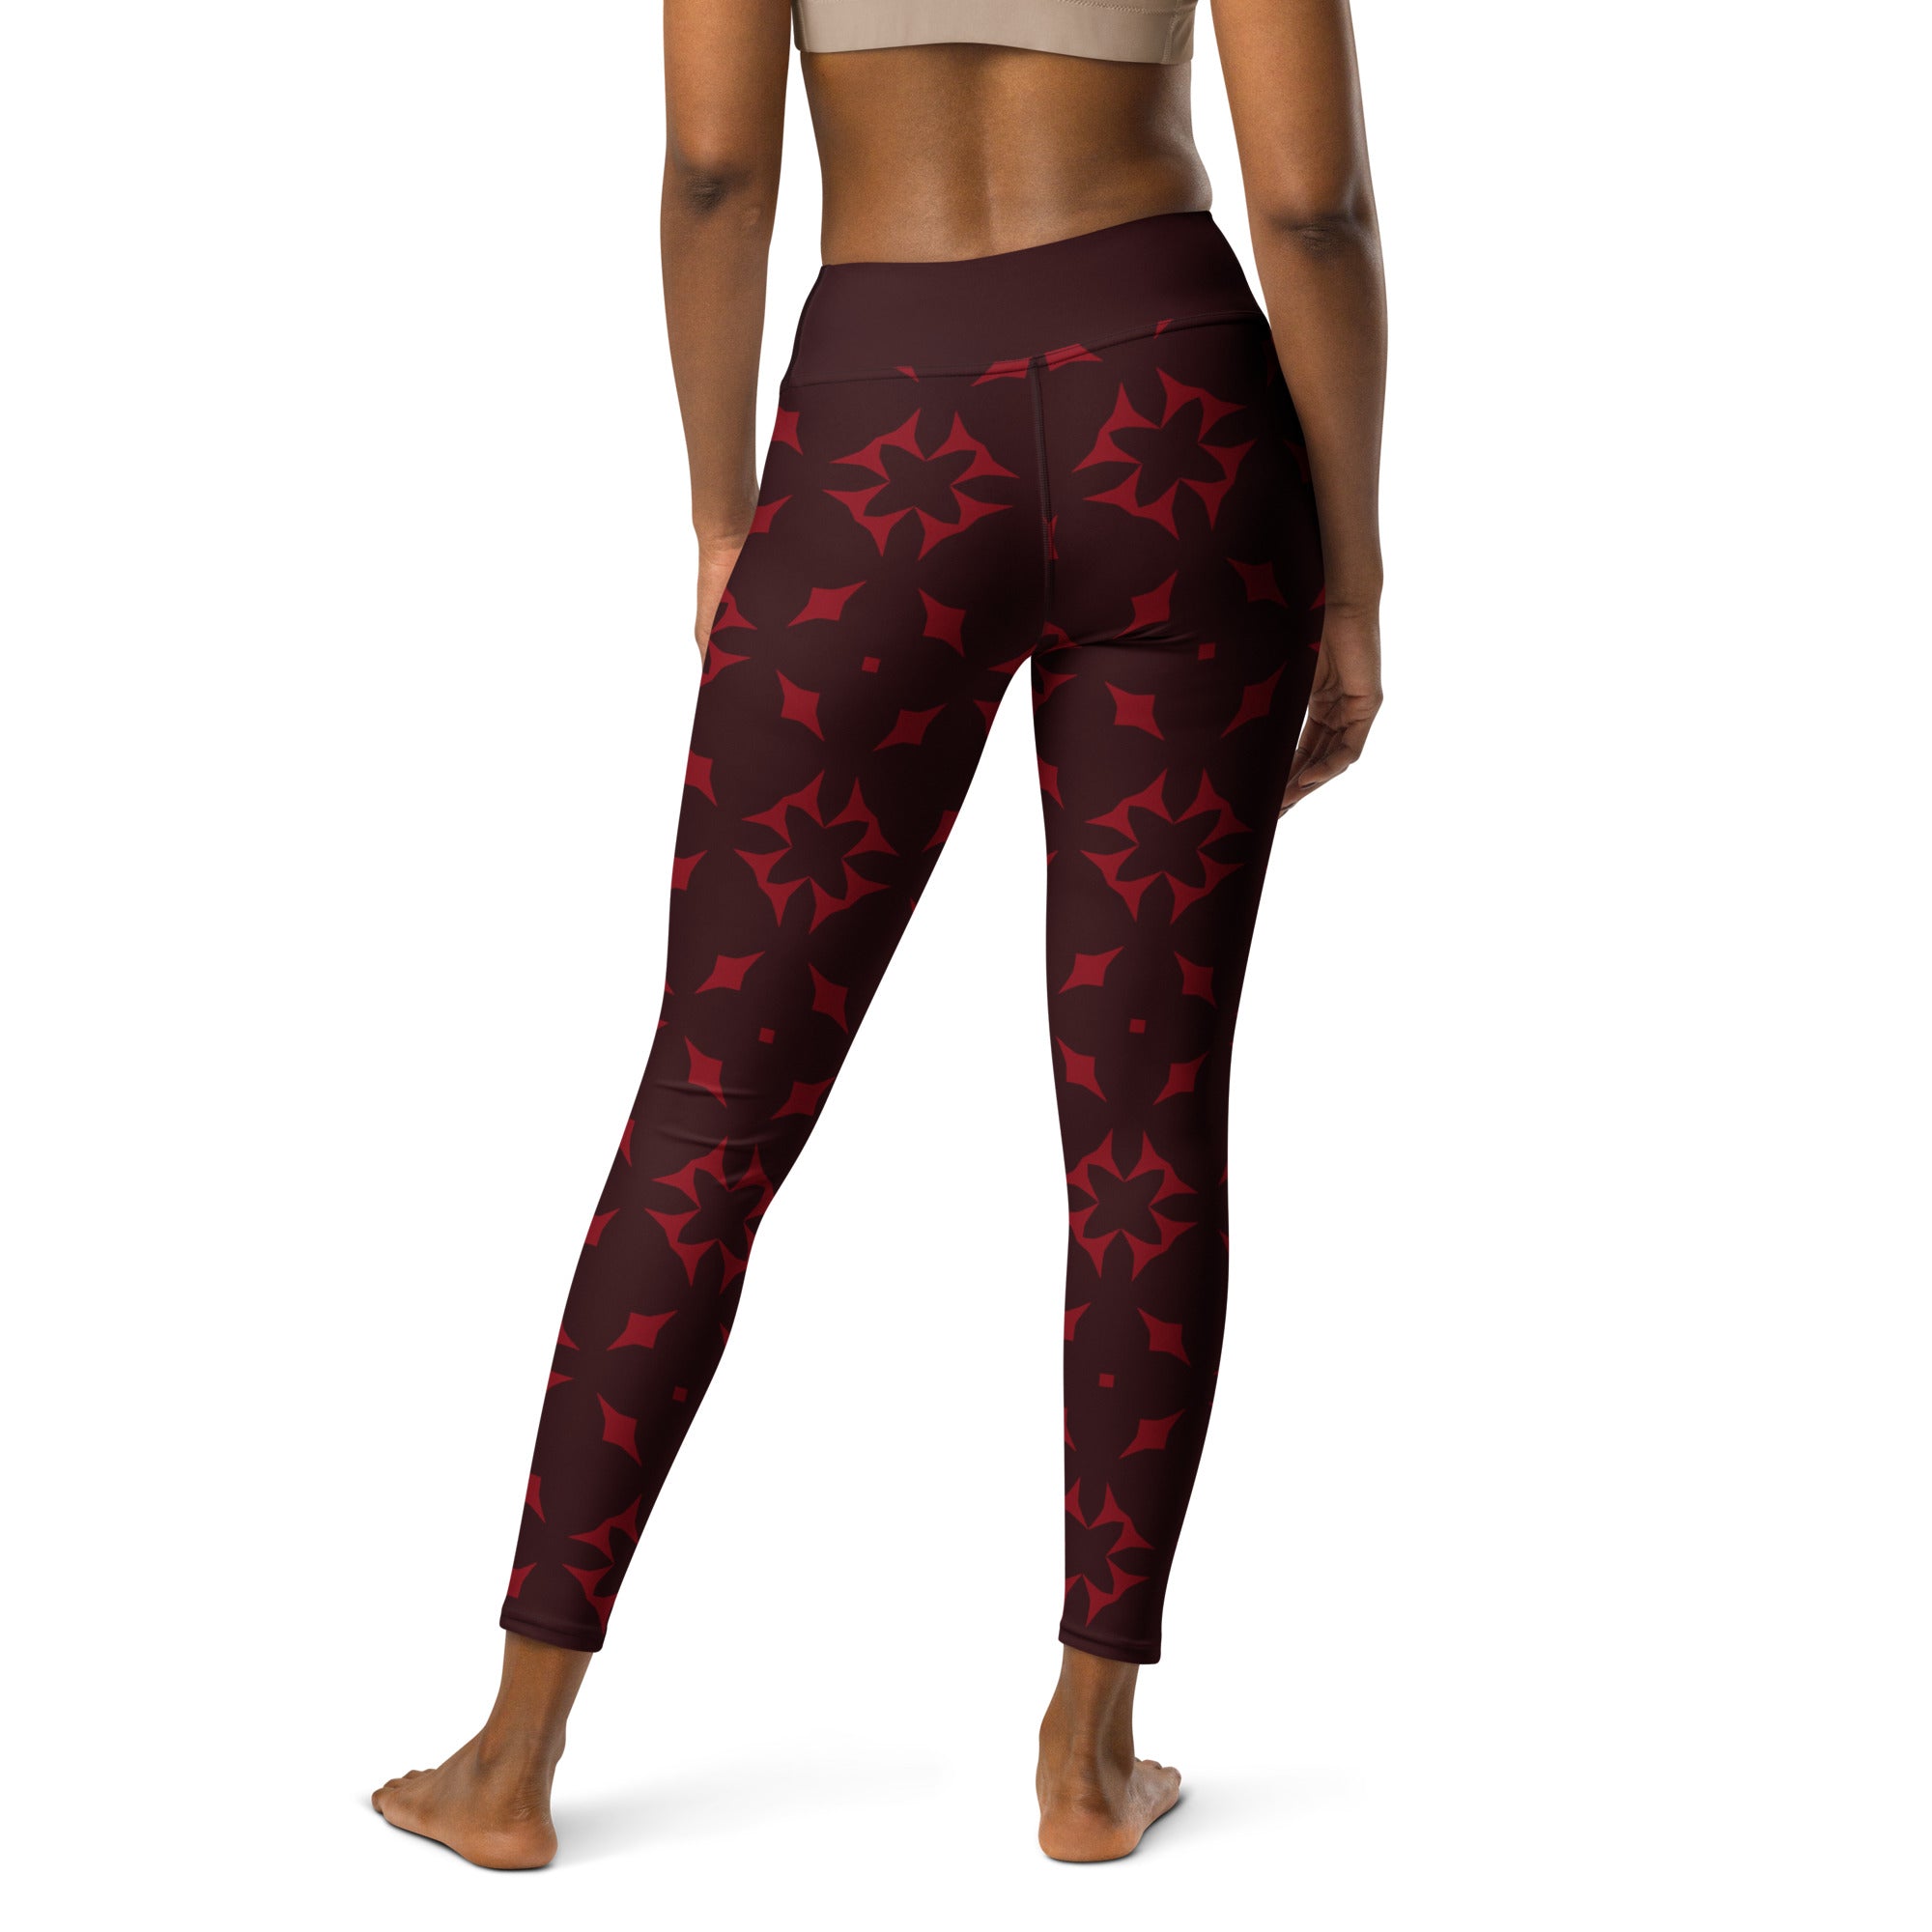 Comfortable and stretchable Mystic Moonlight Yoga Leggings for women.